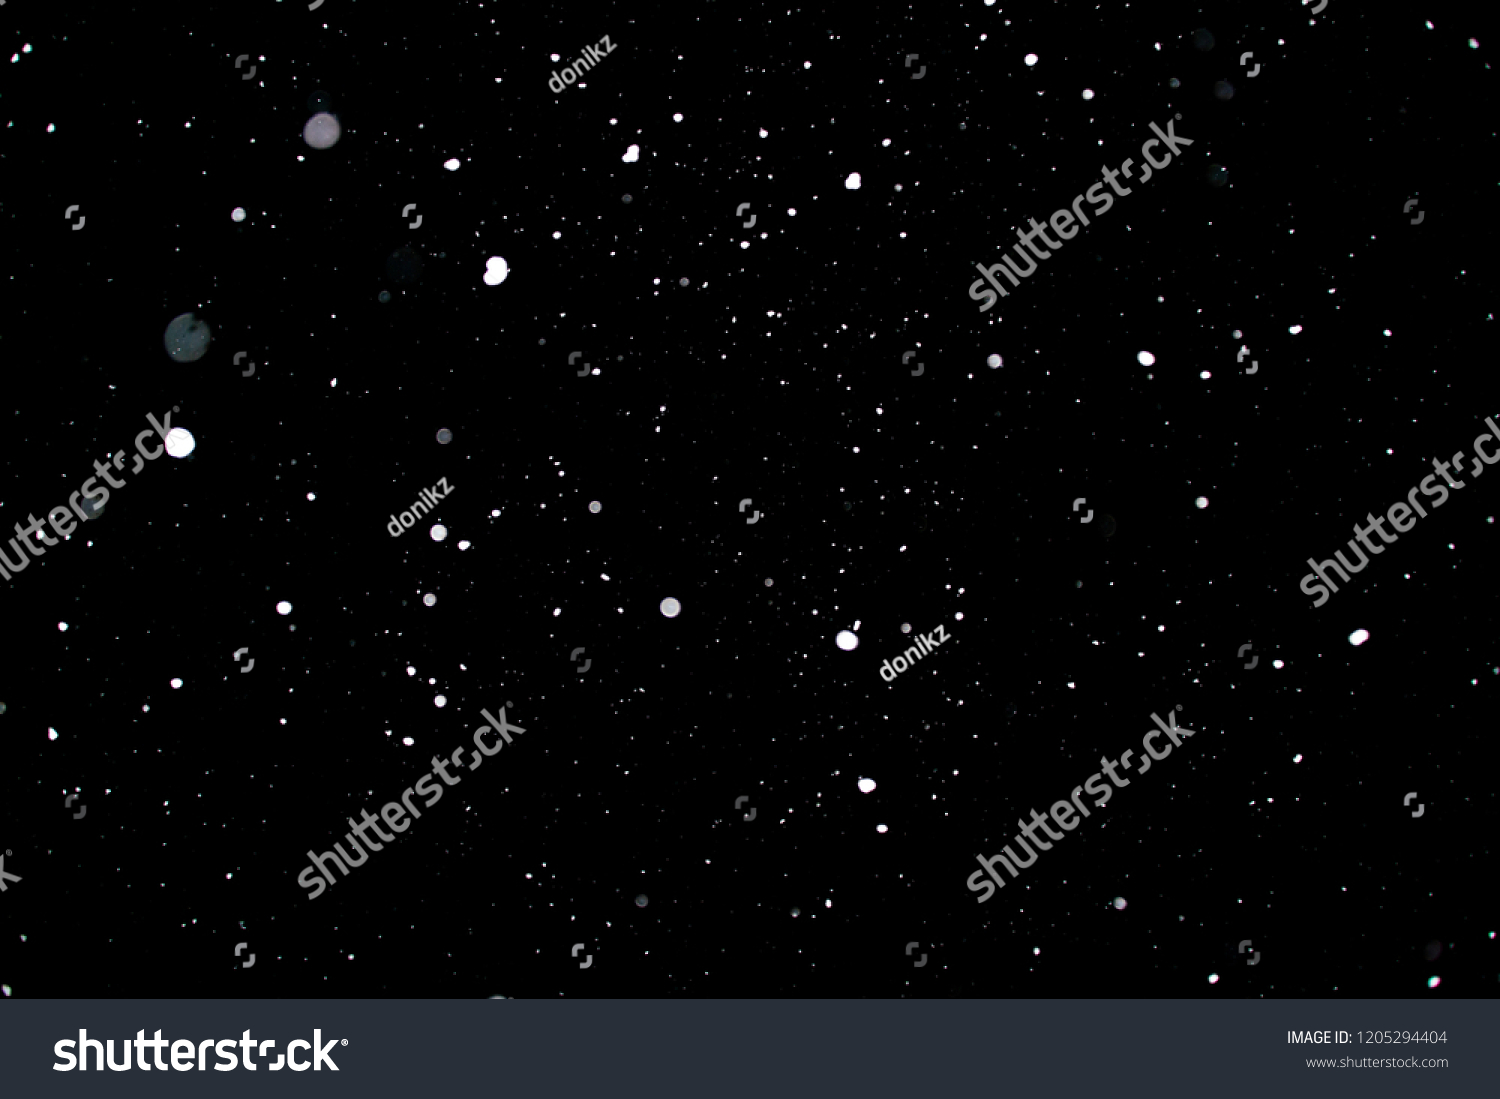 Snowstorm texture. Bokeh lights on black background, shot of flying snowflakes in the air #1205294404